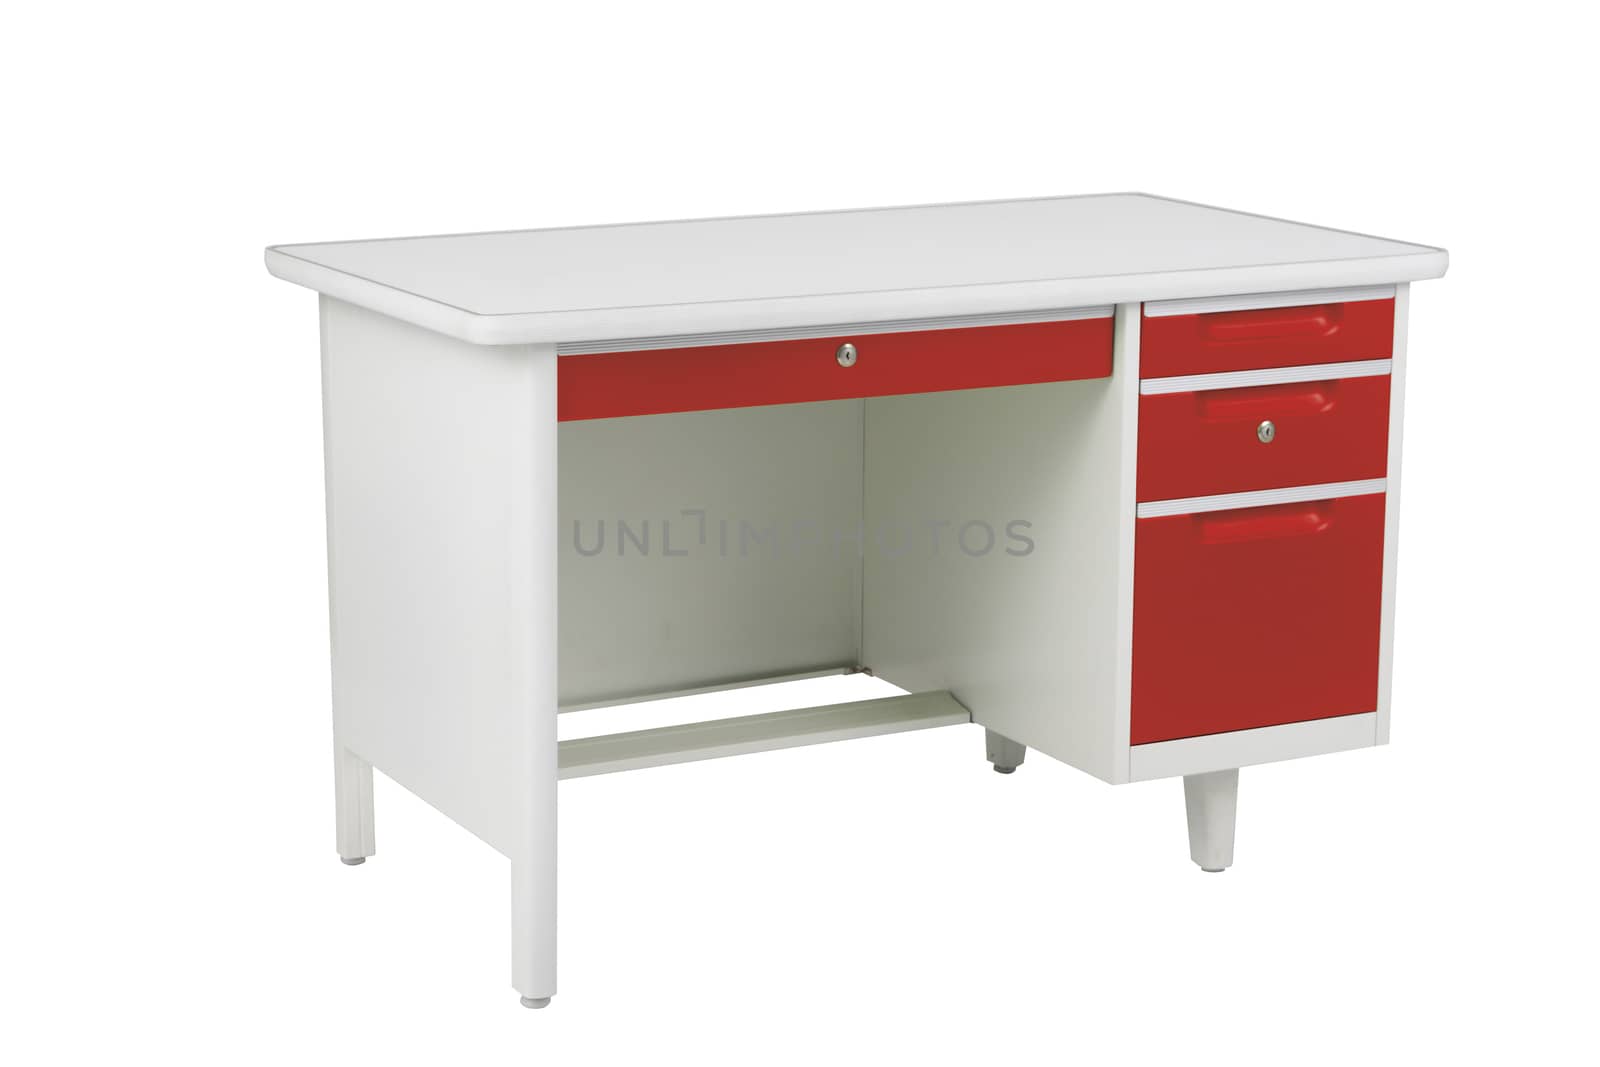 Red and white steel office table with drawers furniture isolated on white background. by sonandonures